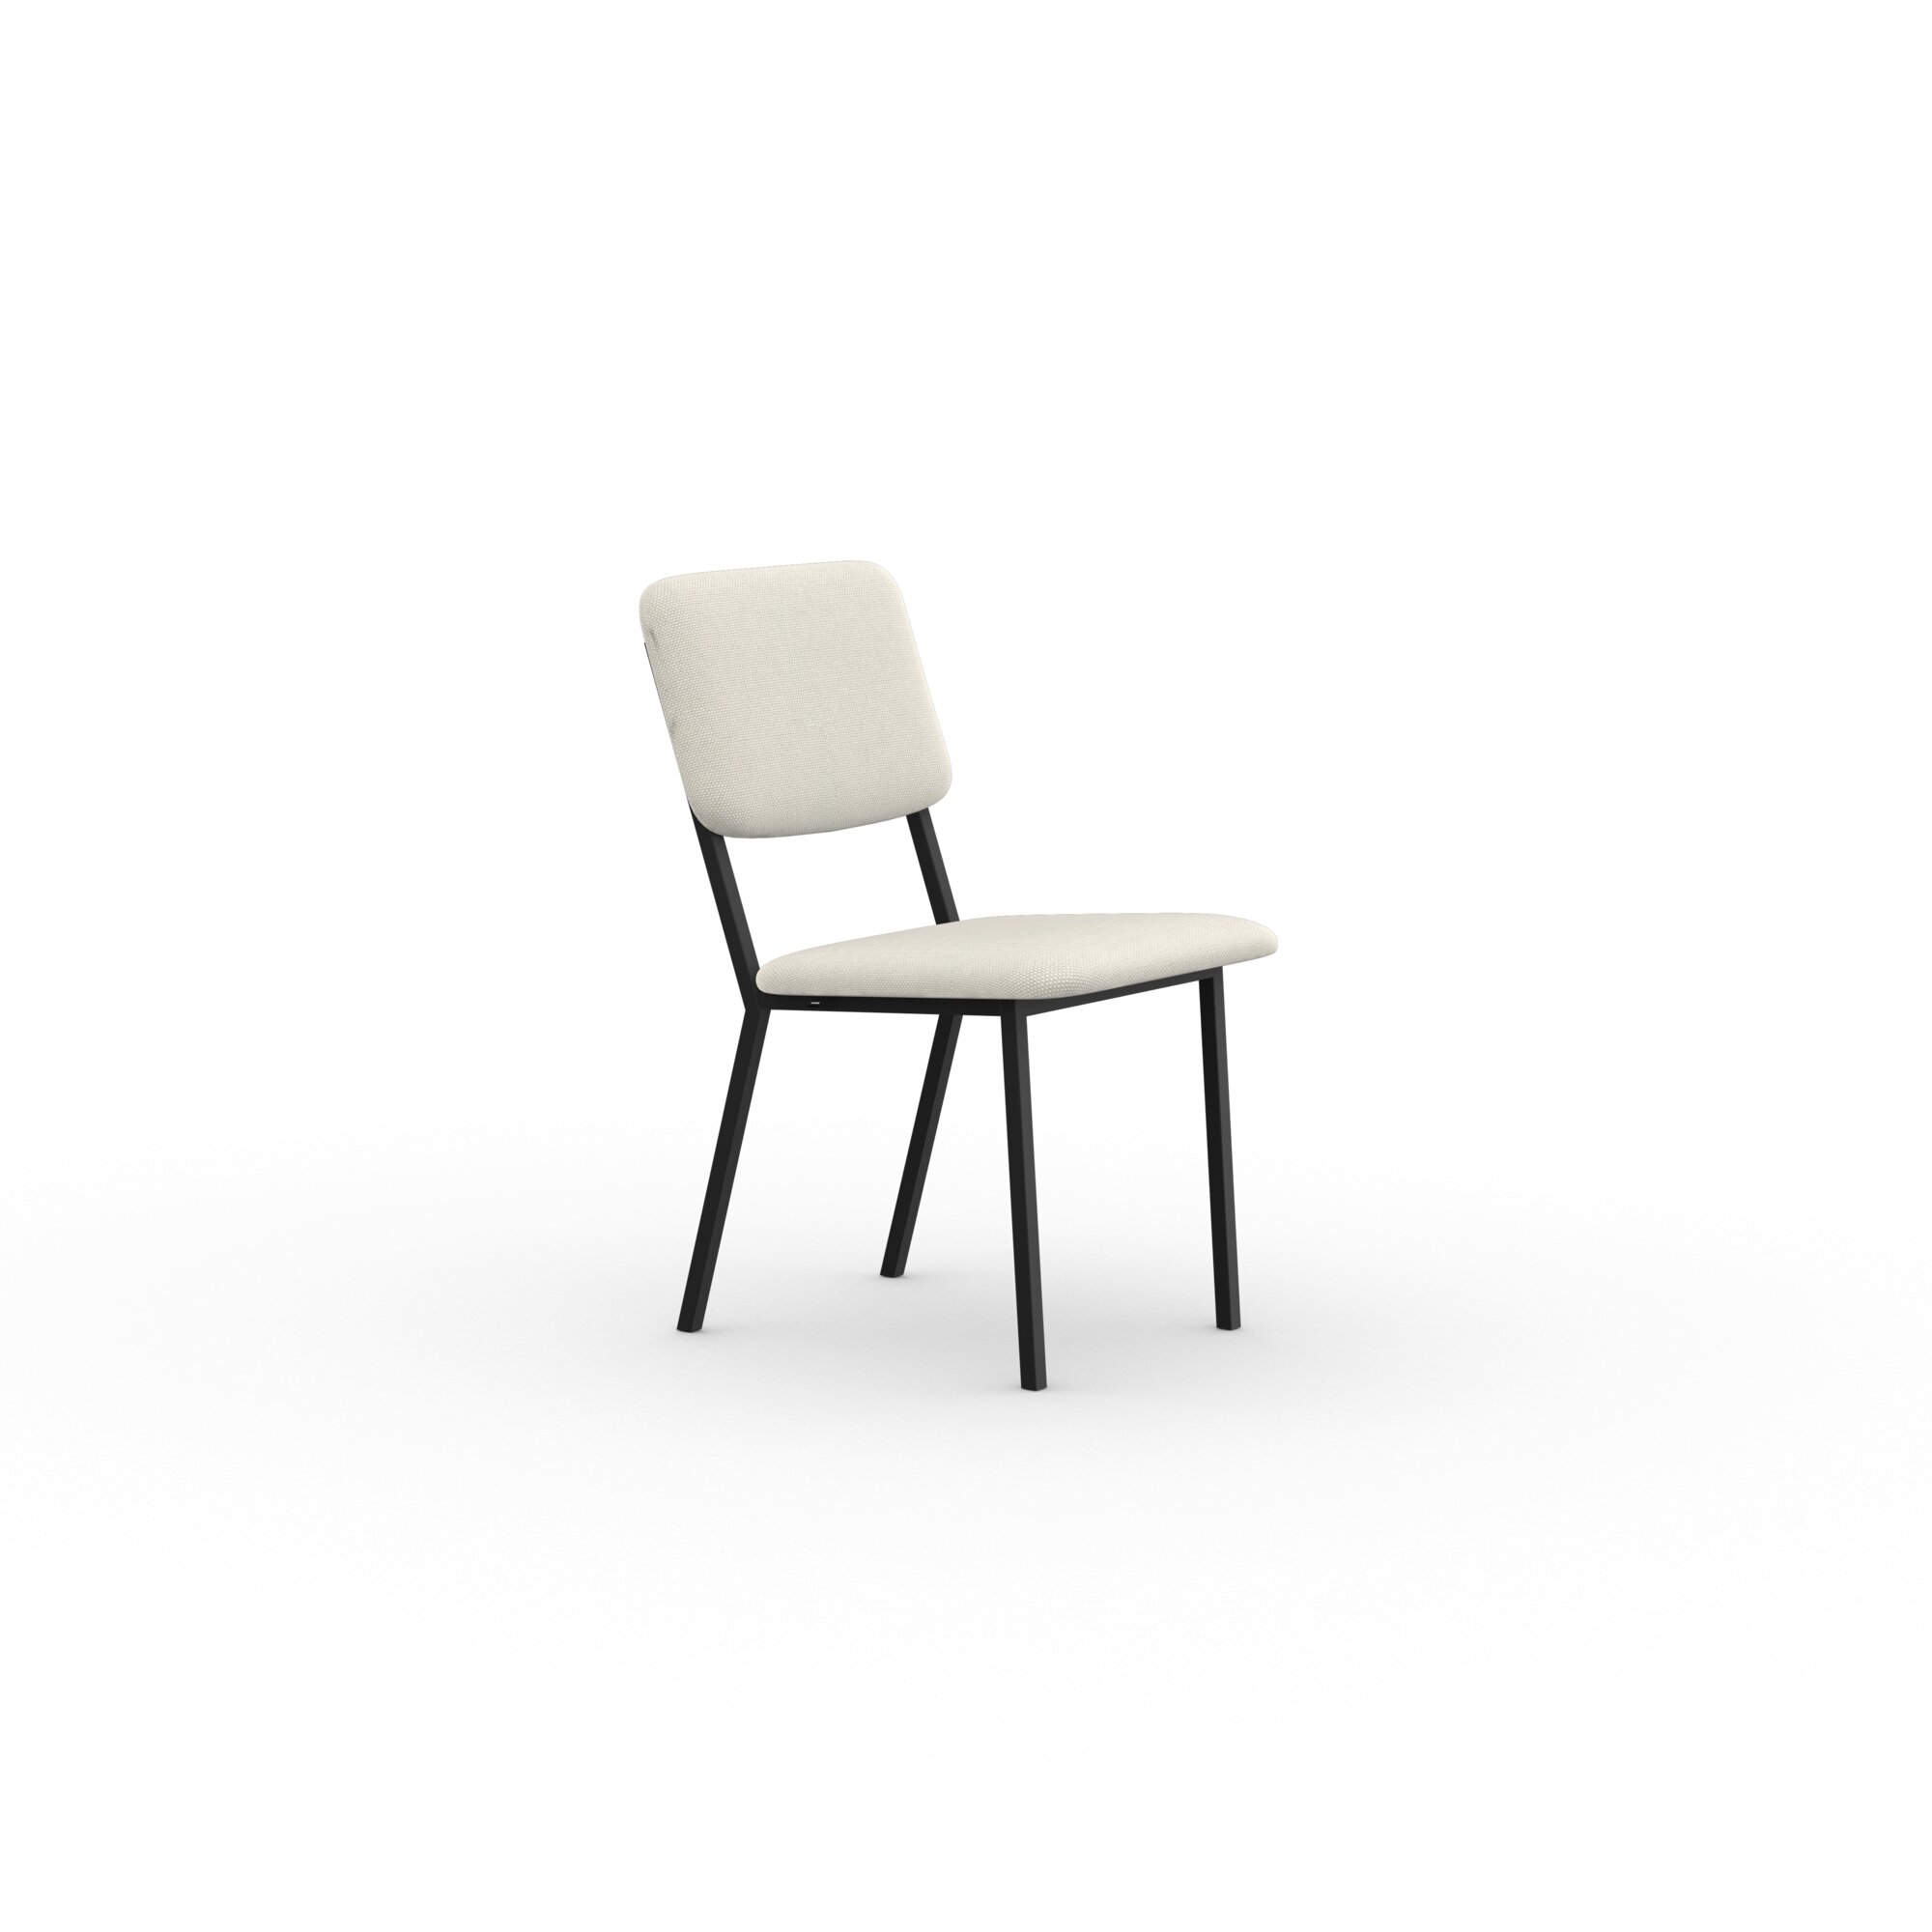 Design modern dining chair | Co Chair without armrest  calvados multibeige9995 | Studio HENK| 